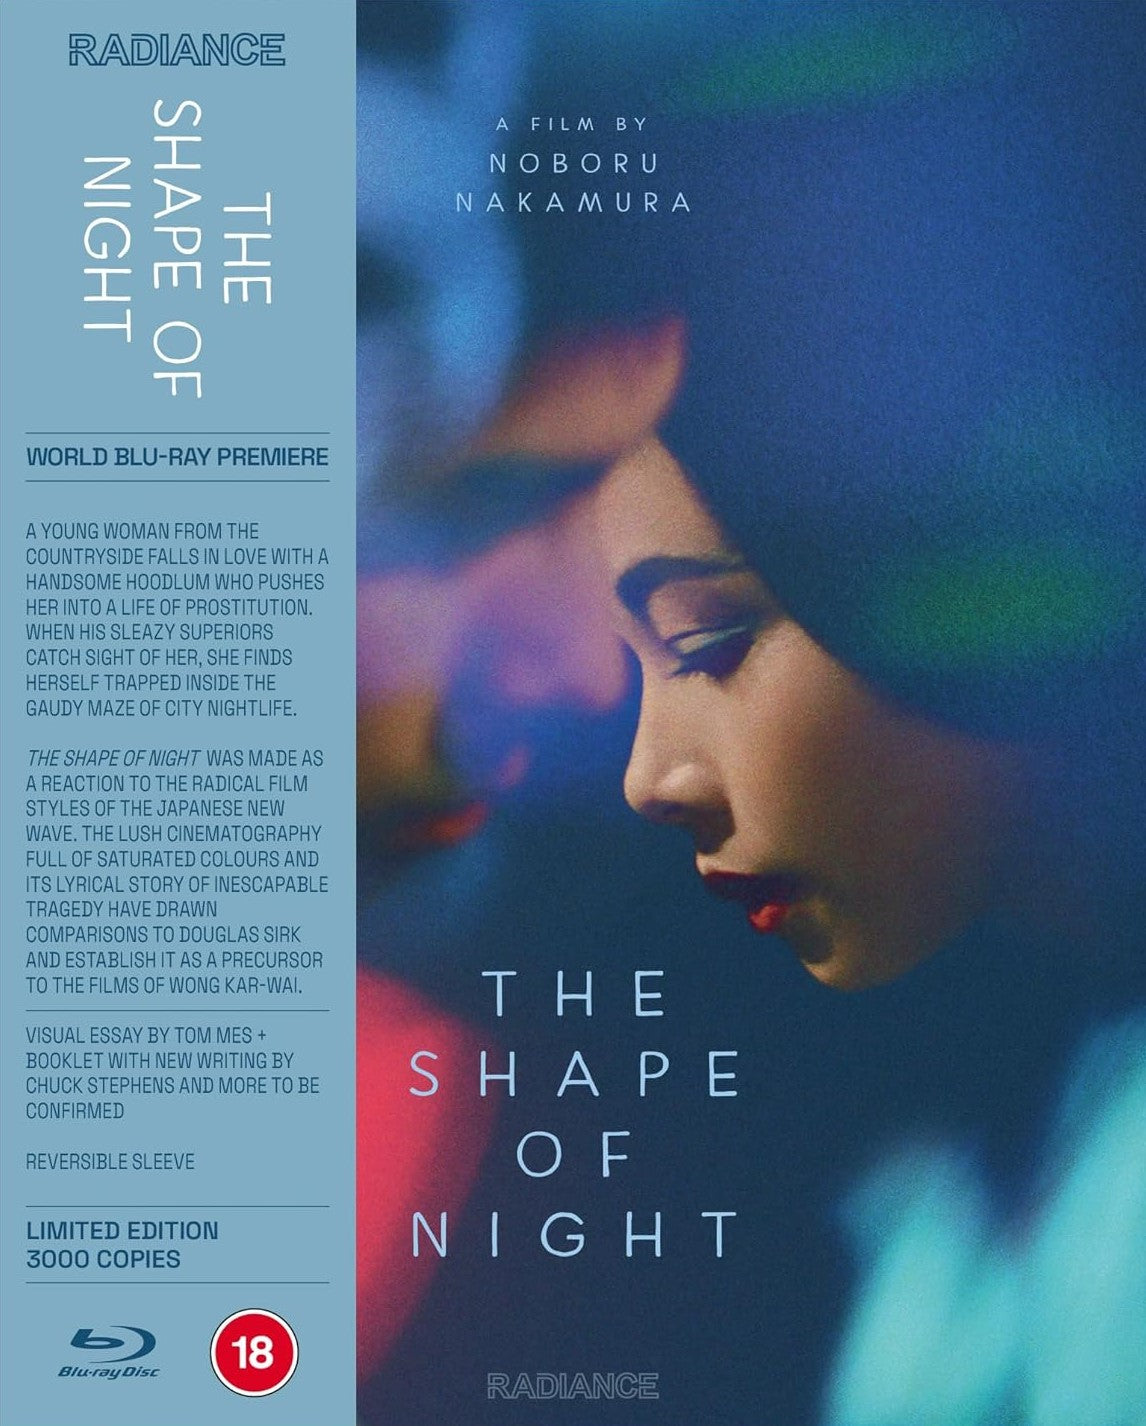 The Shape of Night Limited Edition Radiance Films Blu-Ray [PRE-ORDER]